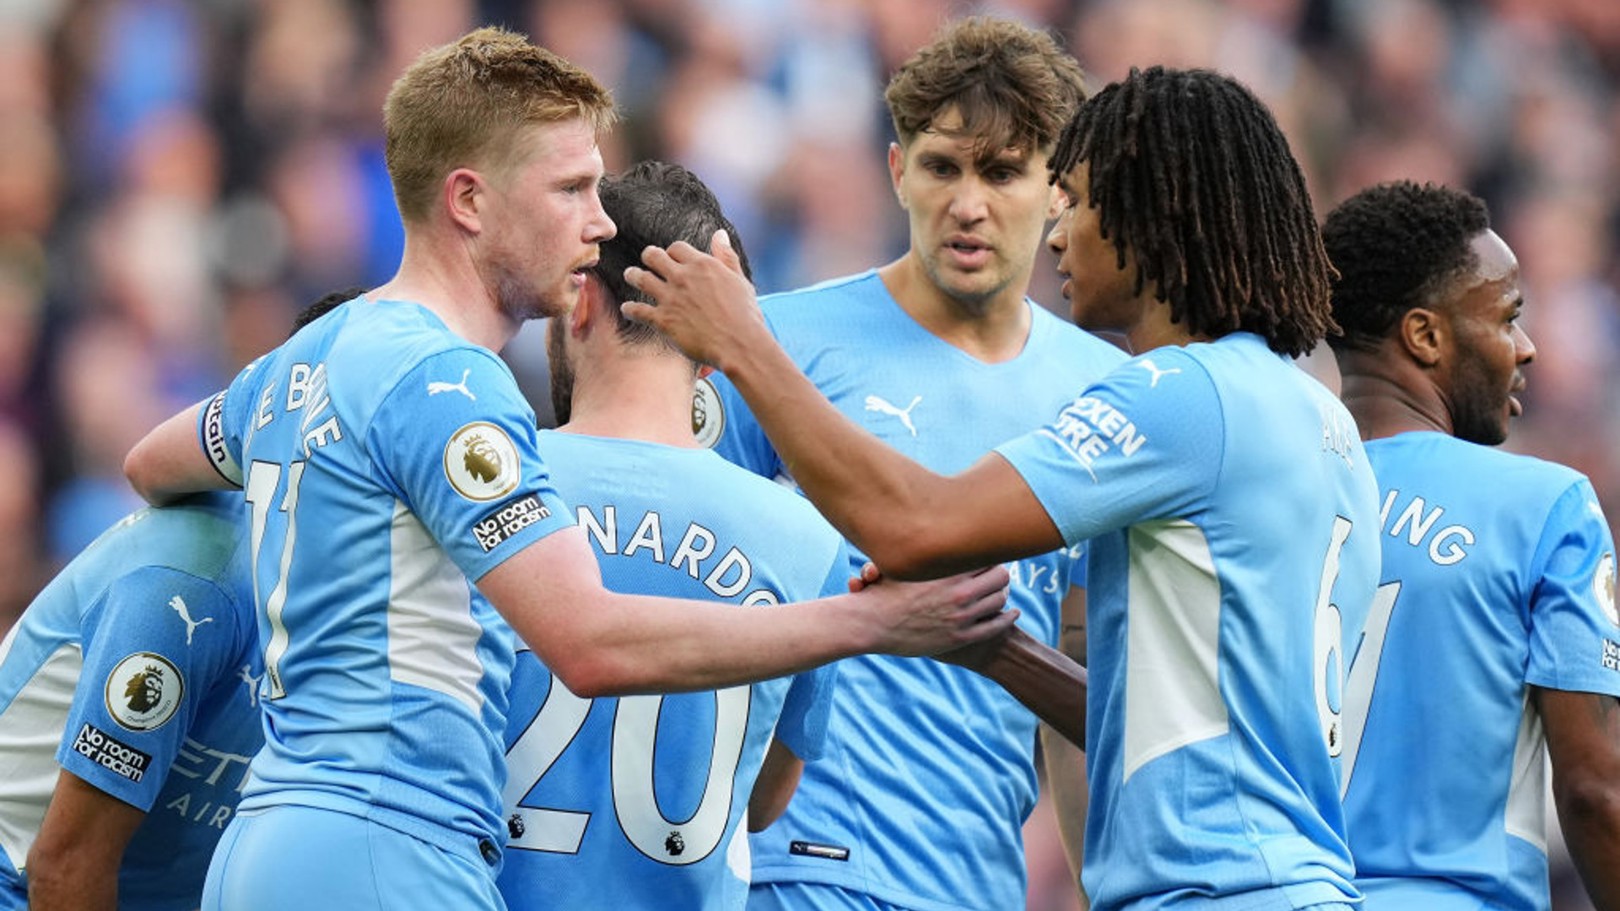 City make seven changes for trip to RB Leipzig